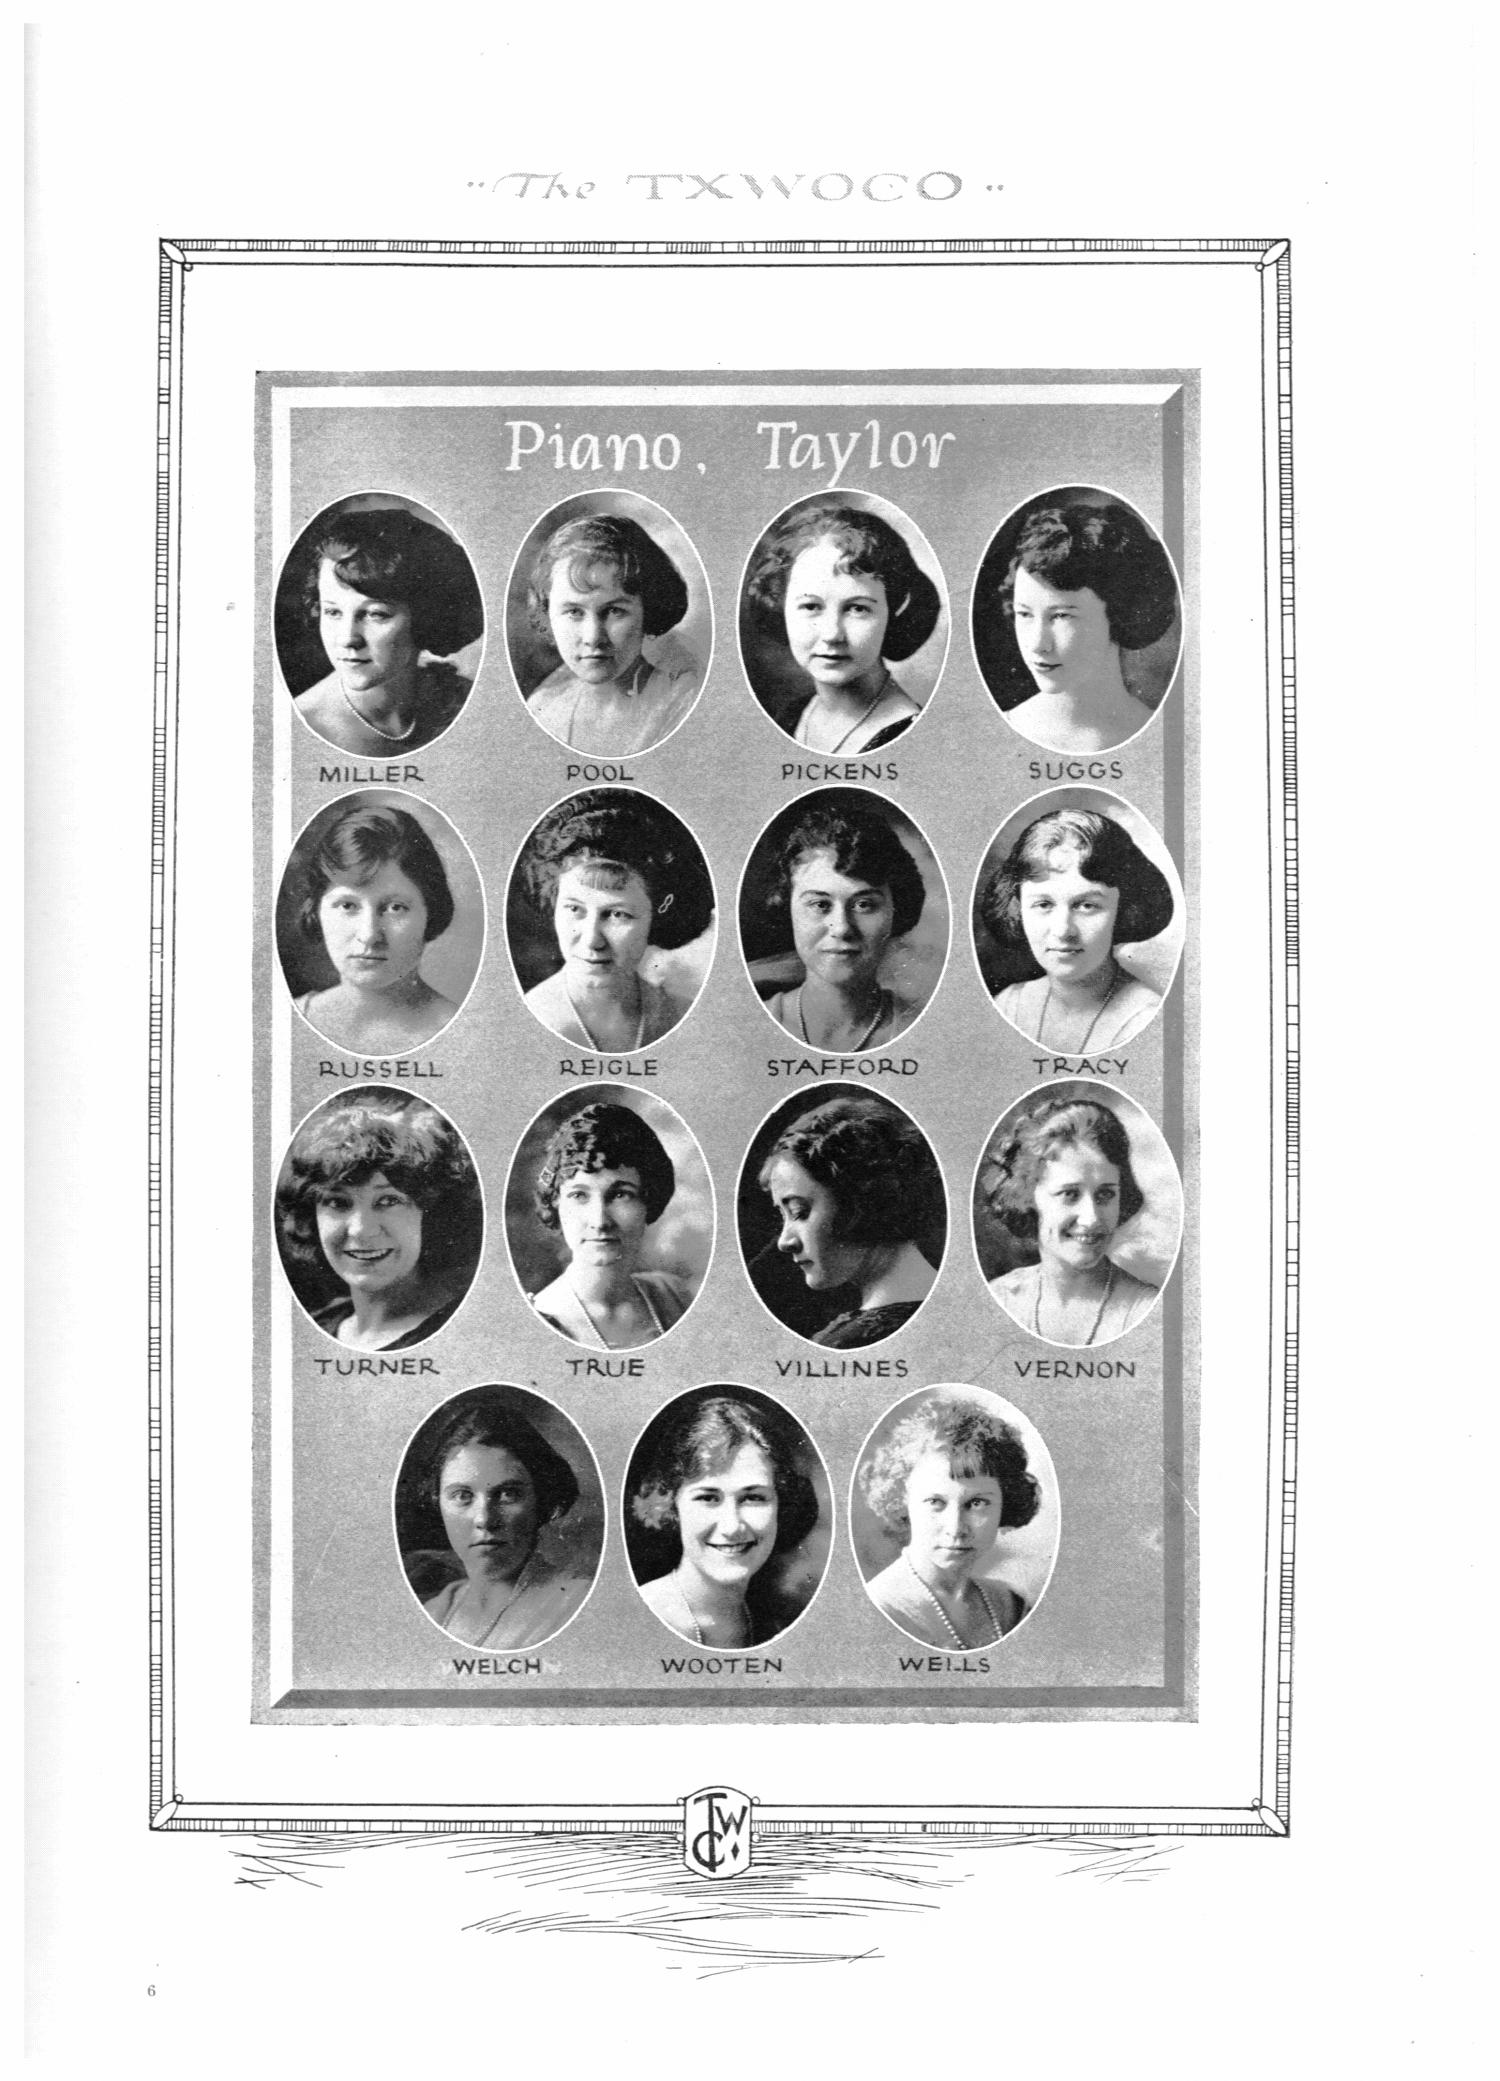 TXWOCO, Yearbook of Texas Woman's College, 1922
                                                
                                                    79
                                                